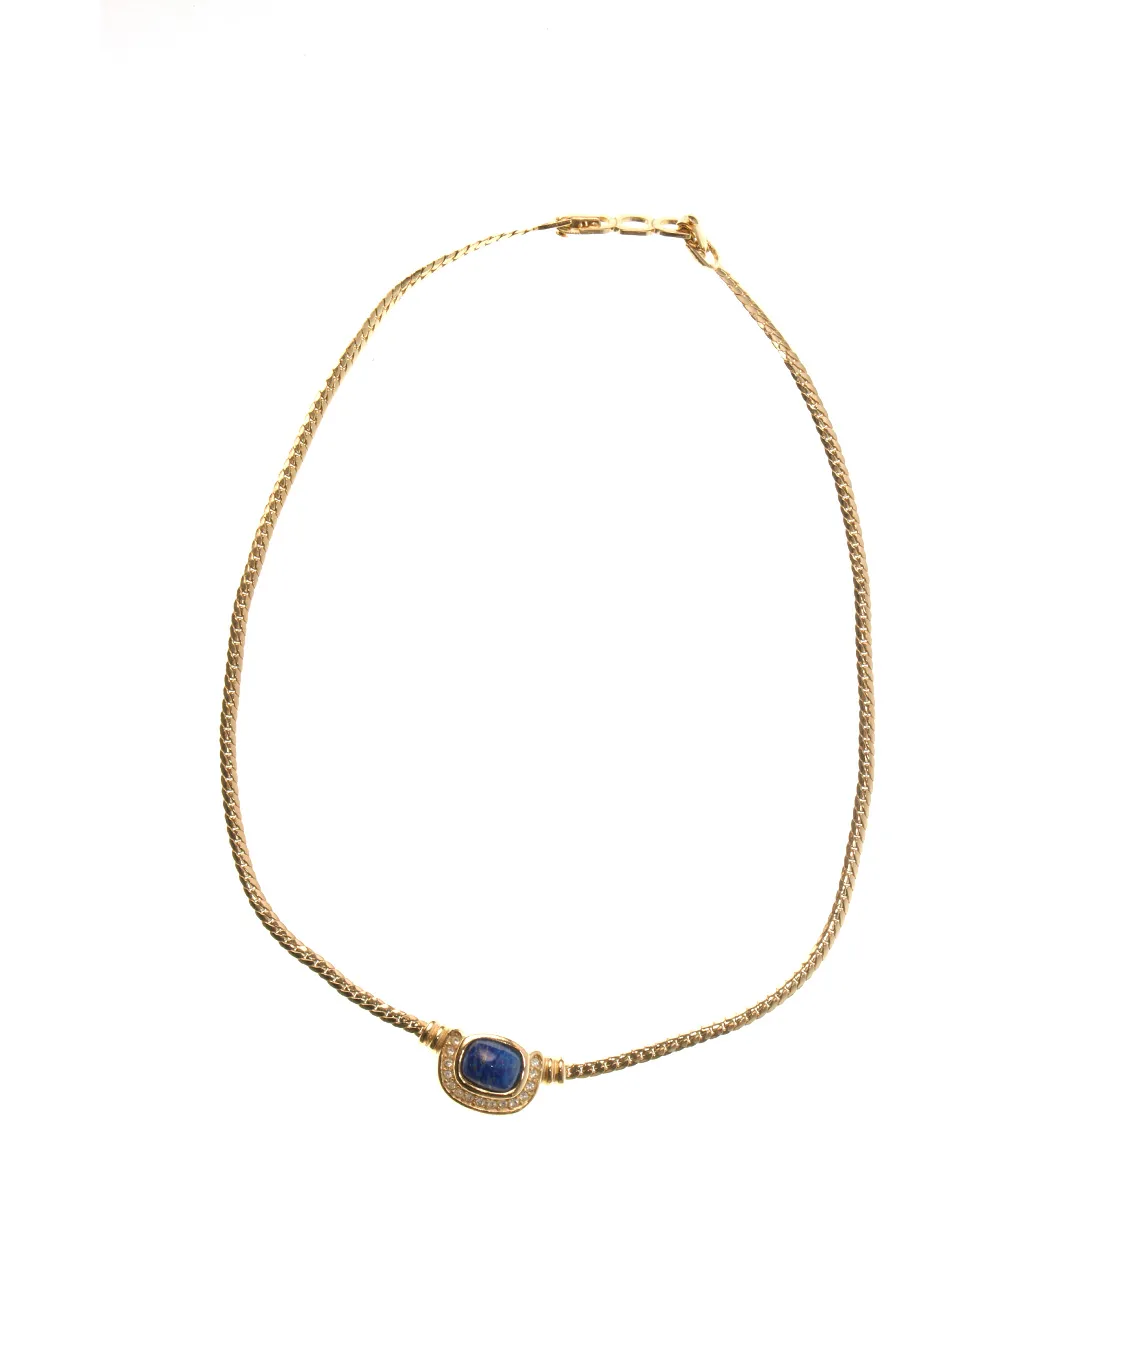 Christian Dior gold necklace with blue stone